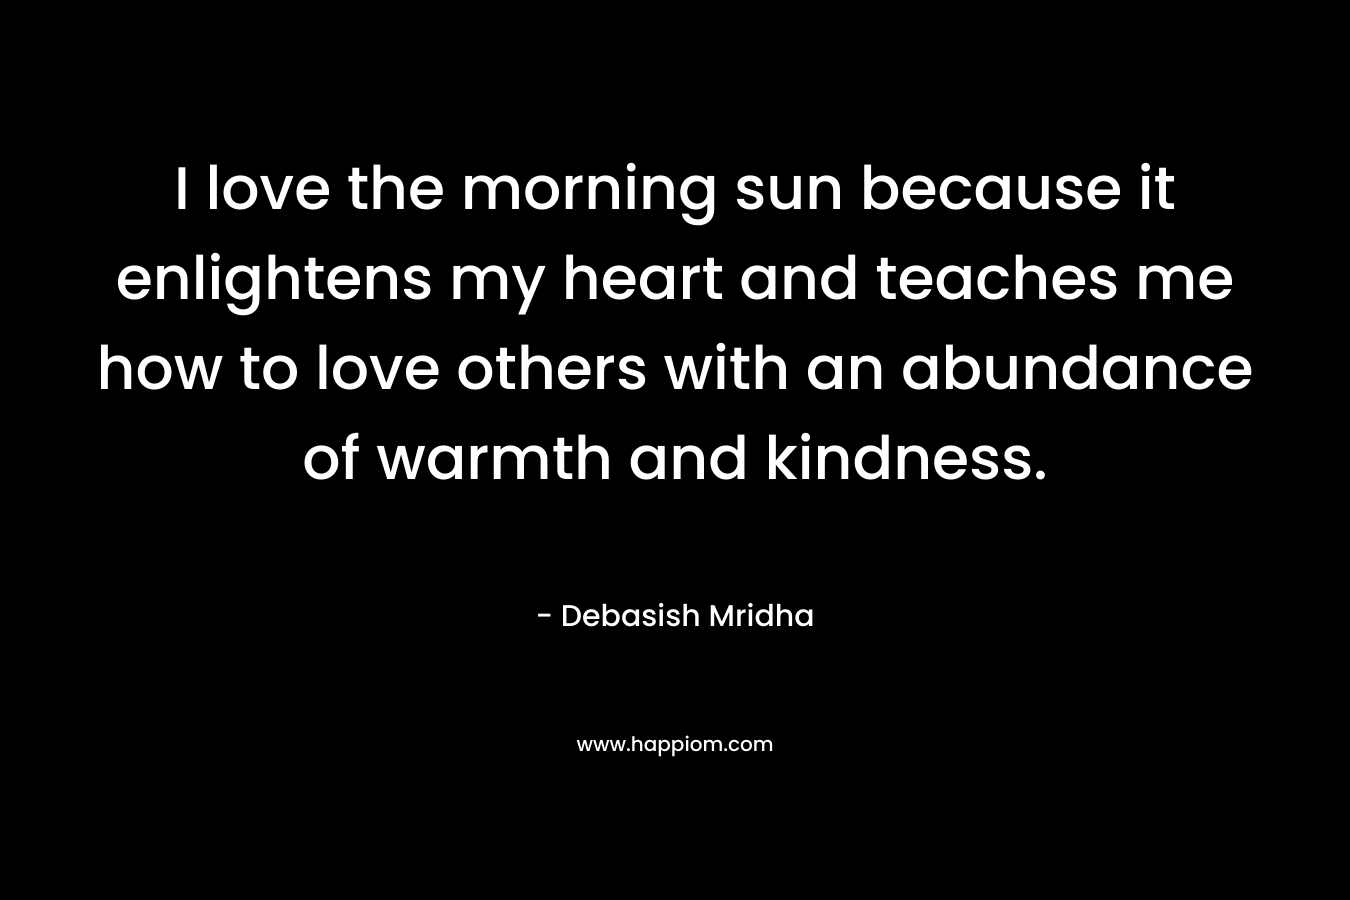 I love the morning sun because it enlightens my heart and teaches me how to love others with an abundance of warmth and kindness.